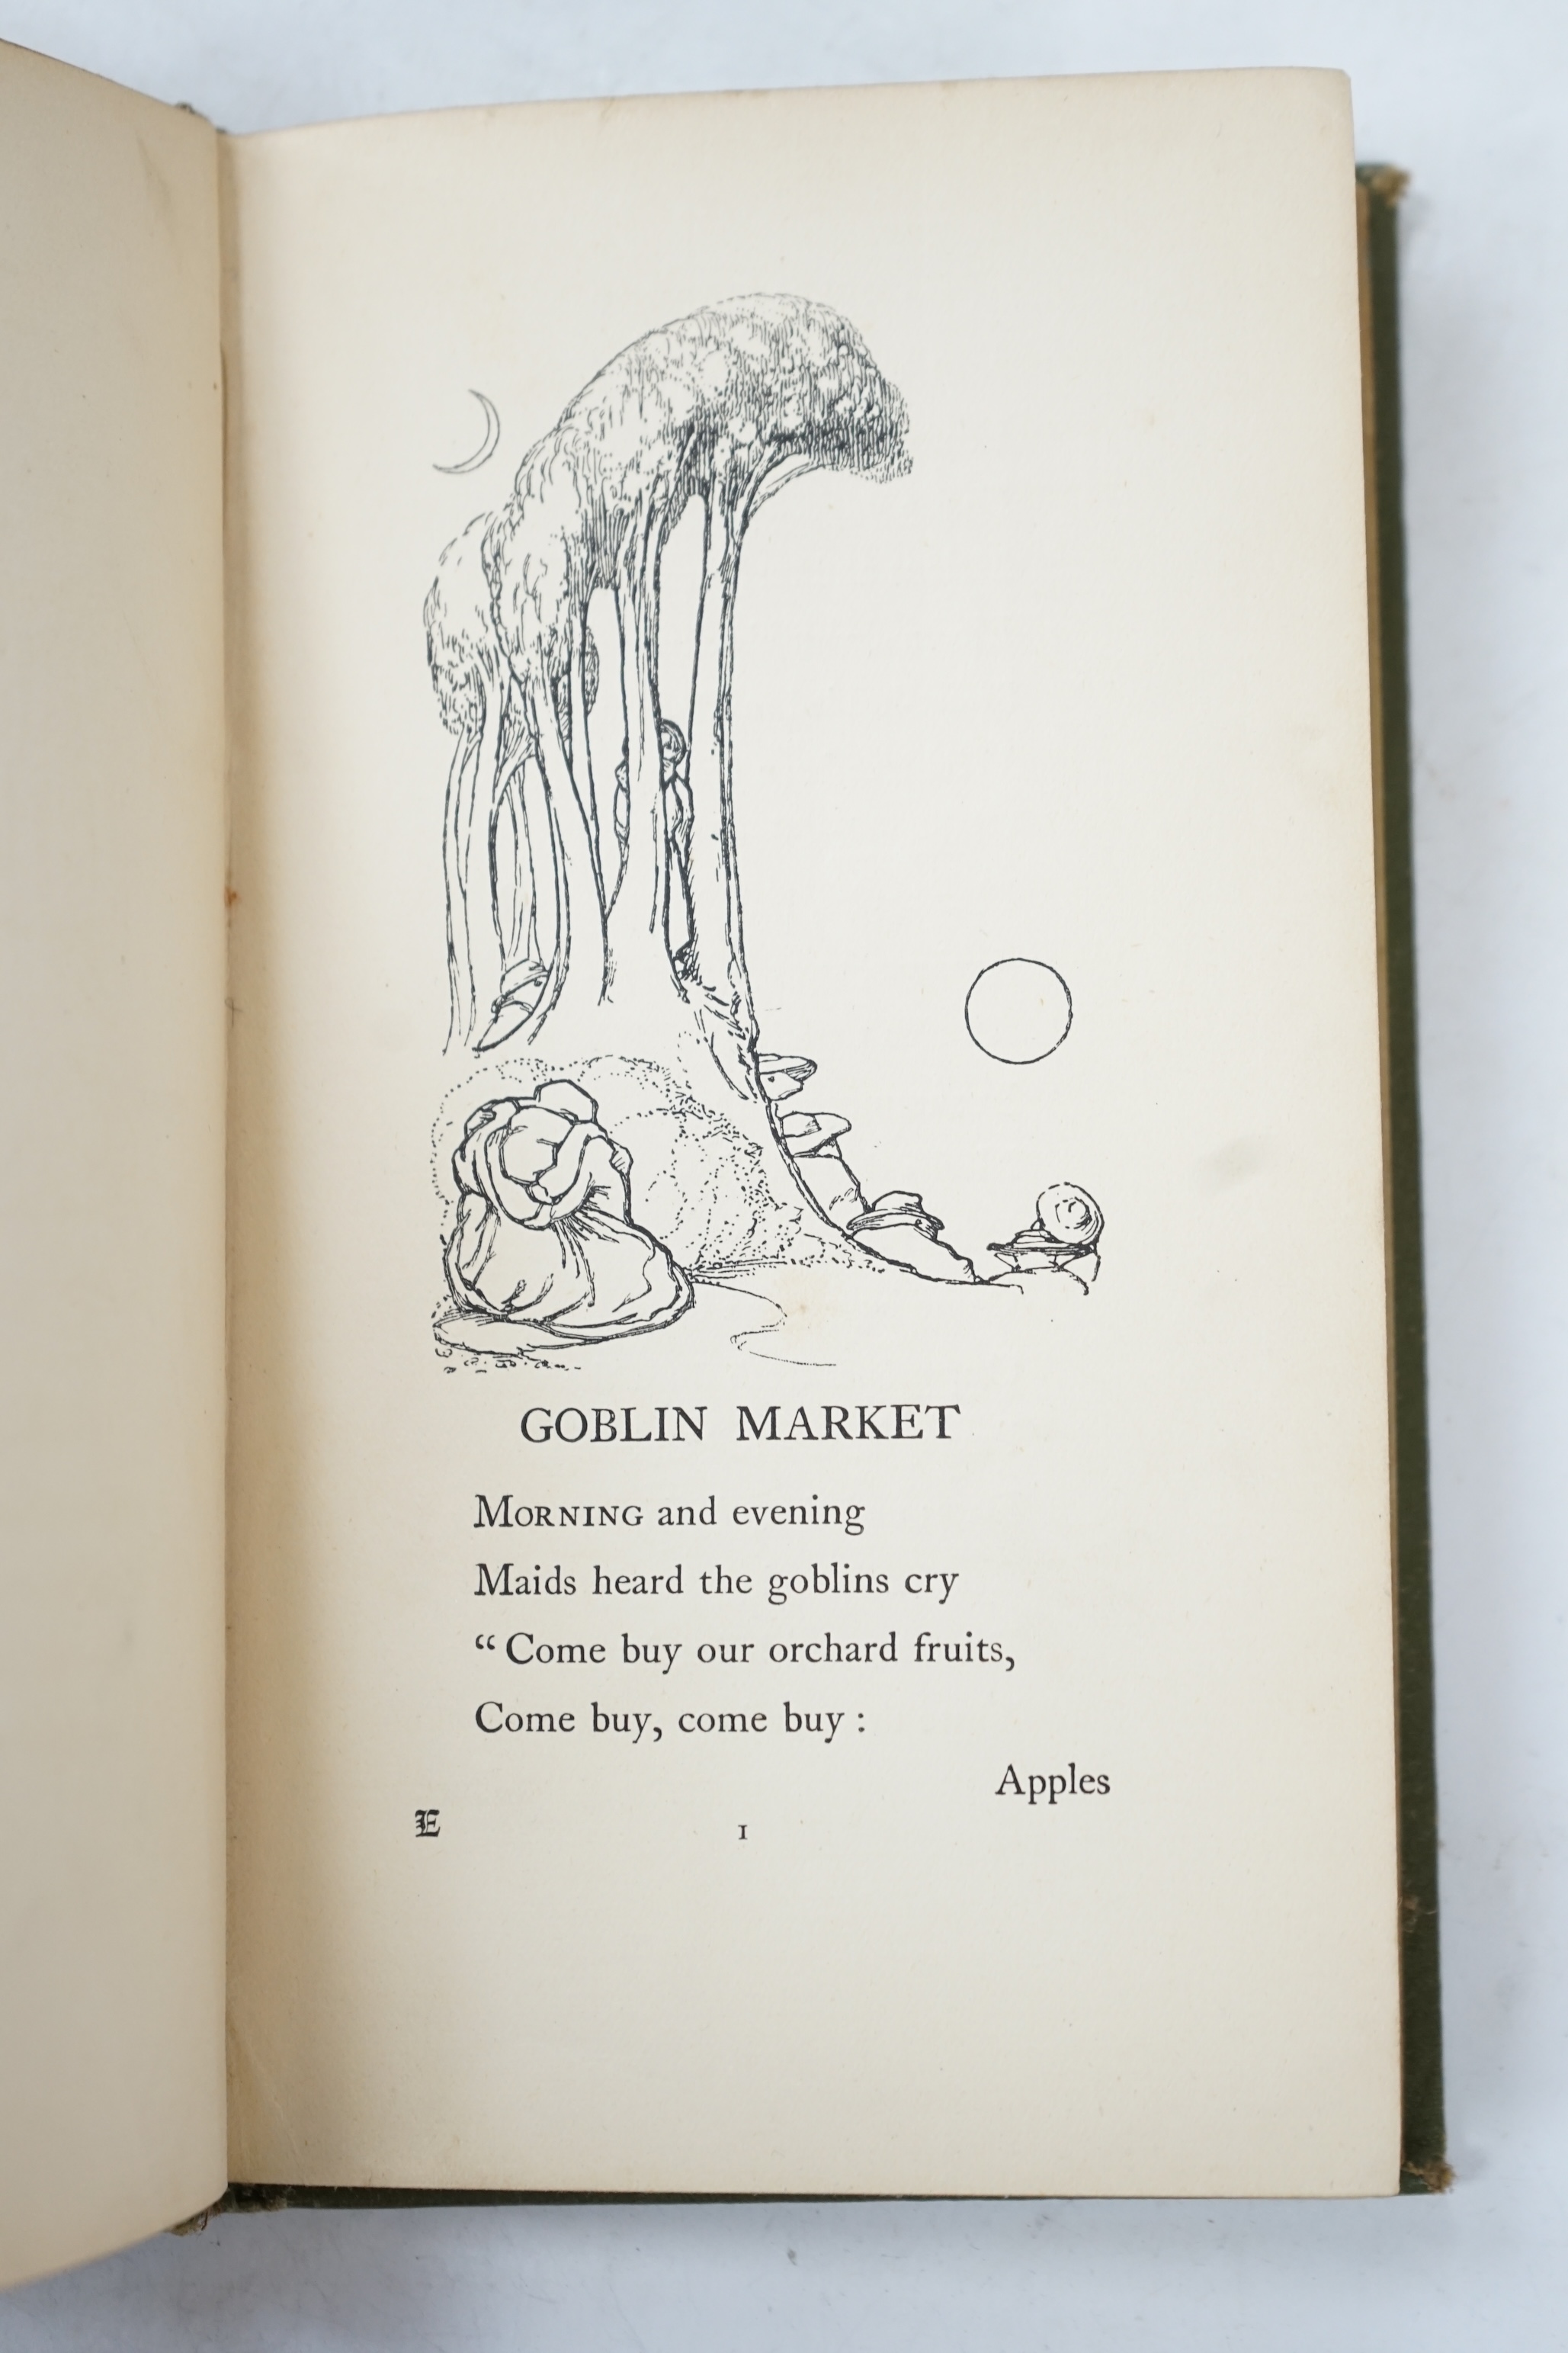 Rossetti, Christina - Goblin Market, 1st edition, illustrated with 12 full-page woodcuts by Laurence Houseman, narrow 12mo, original green and gilt decorative cloth, child's pencil scribbling to some blank pages, Macmill